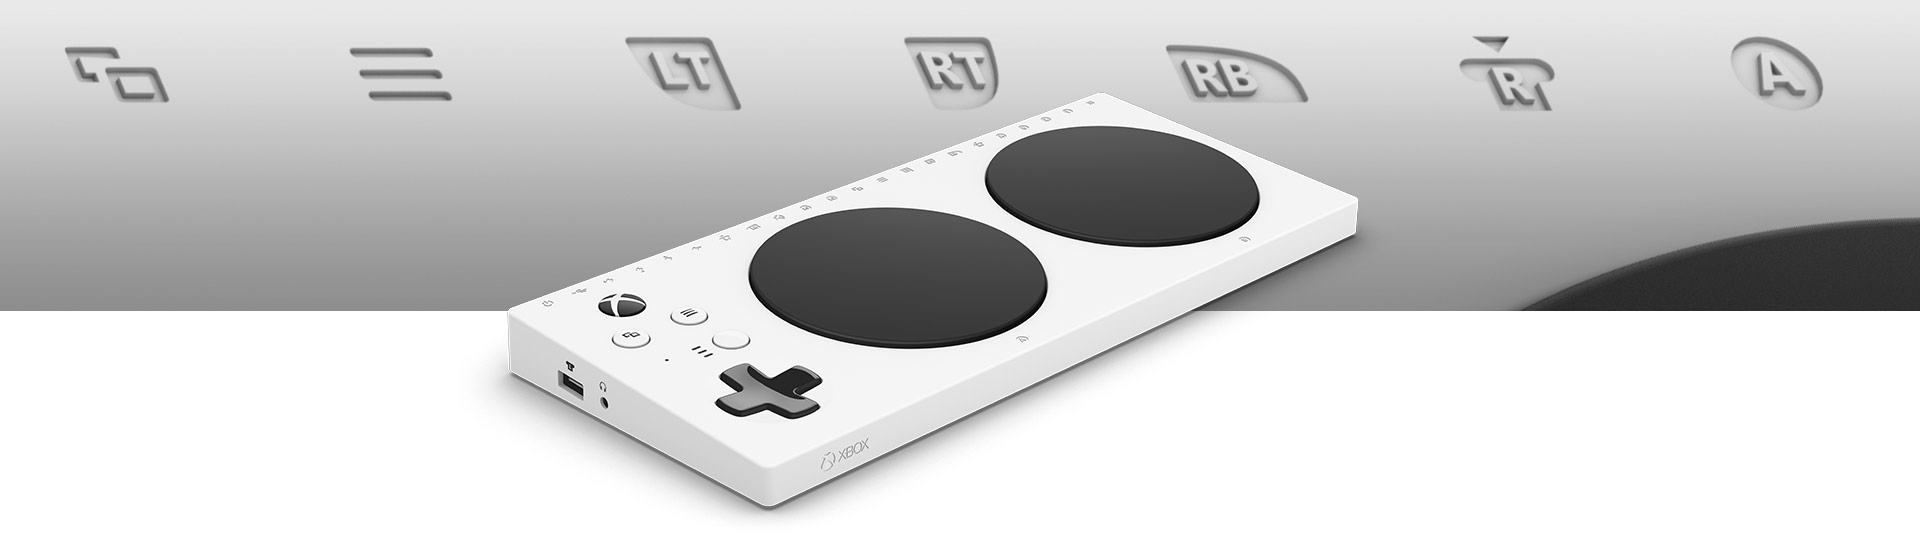 undefined | Xbox Adaptive Controller